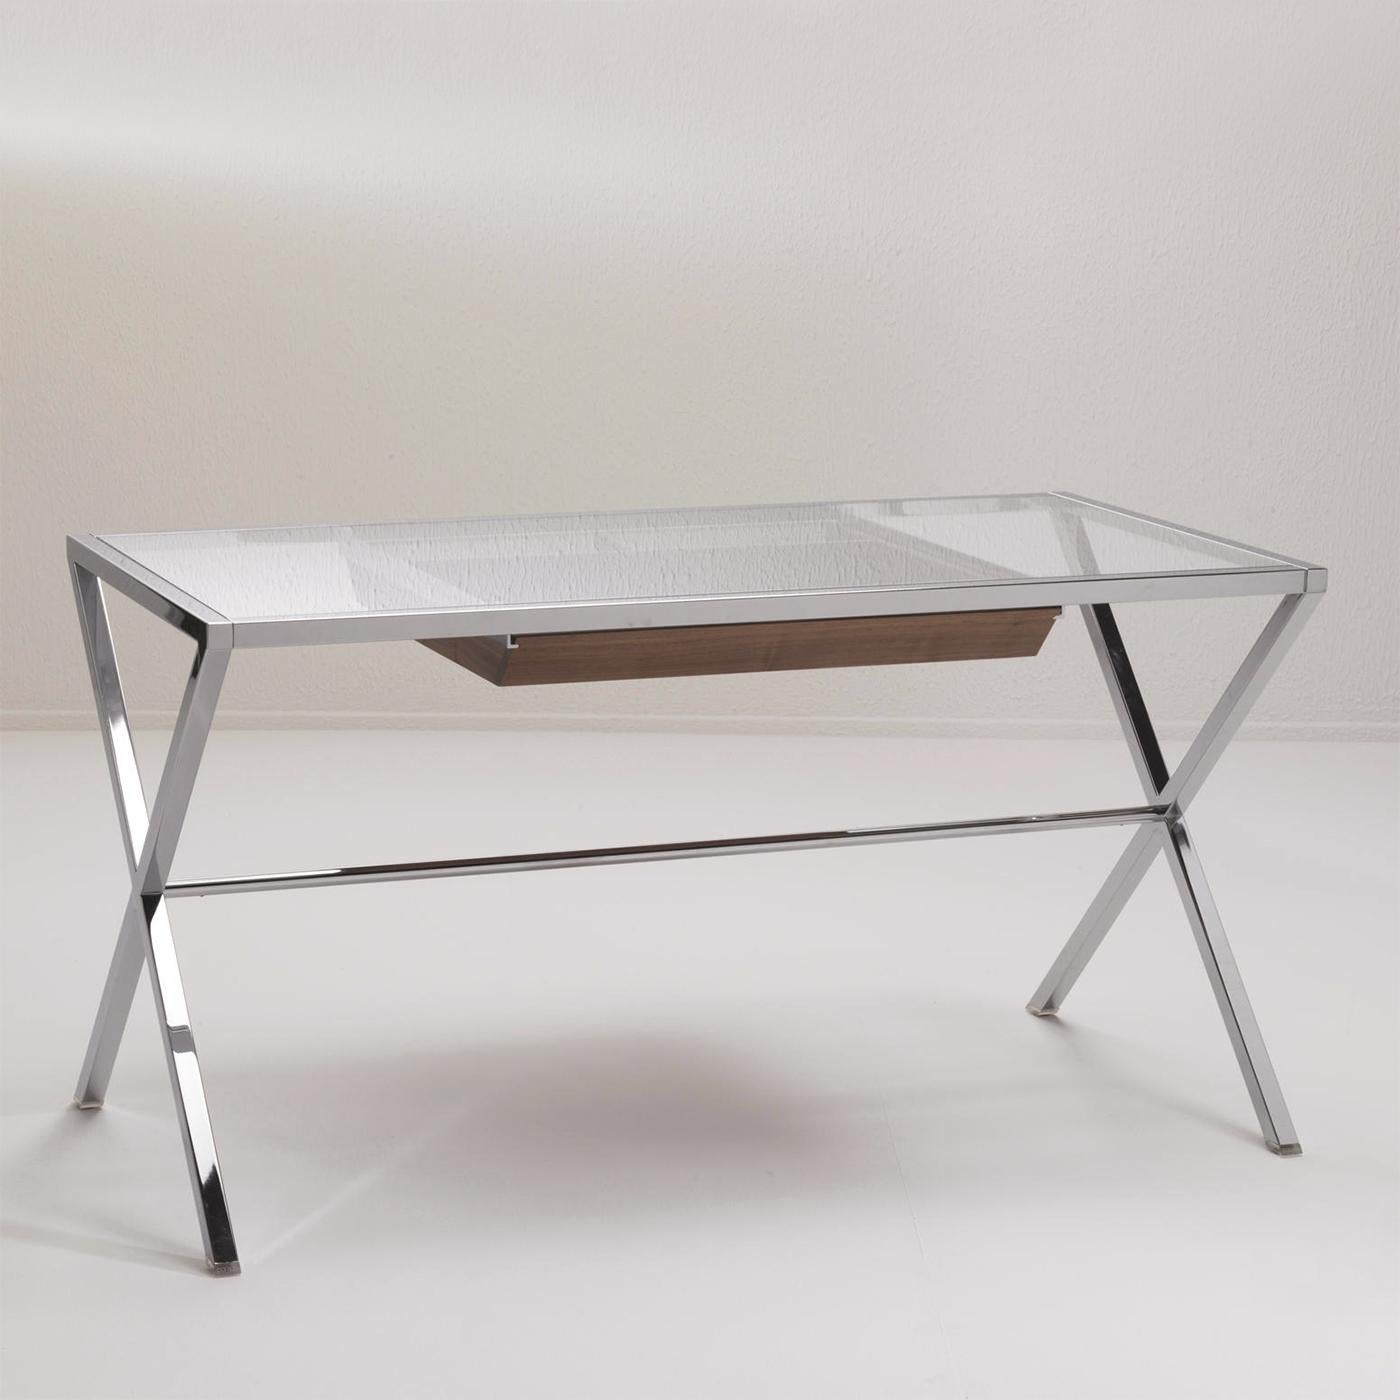 Desk Killy with steel structure in chrome plated
finish. With tempered clear glass top, 8mm thickness.
With 1 drawer in solid walnut wood under the top.